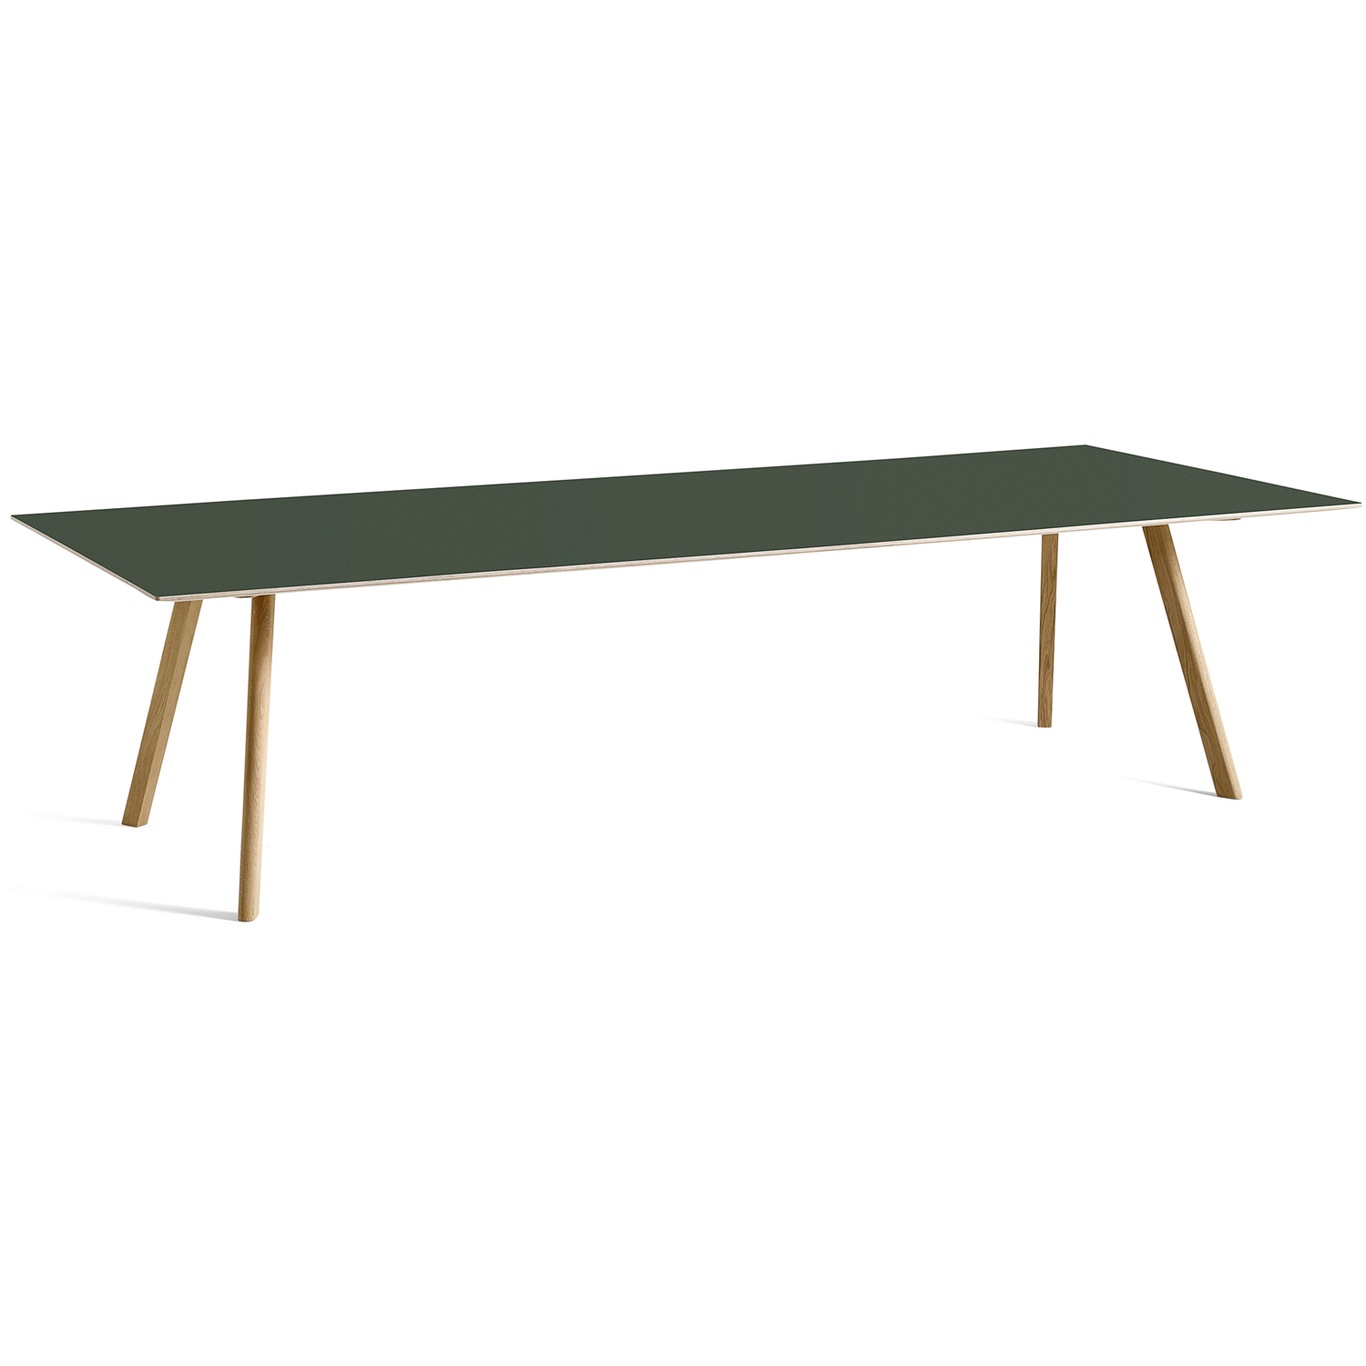 CPH 30 Table 300x90 cm, Water-based Lacquered Oak / Green Linoleum